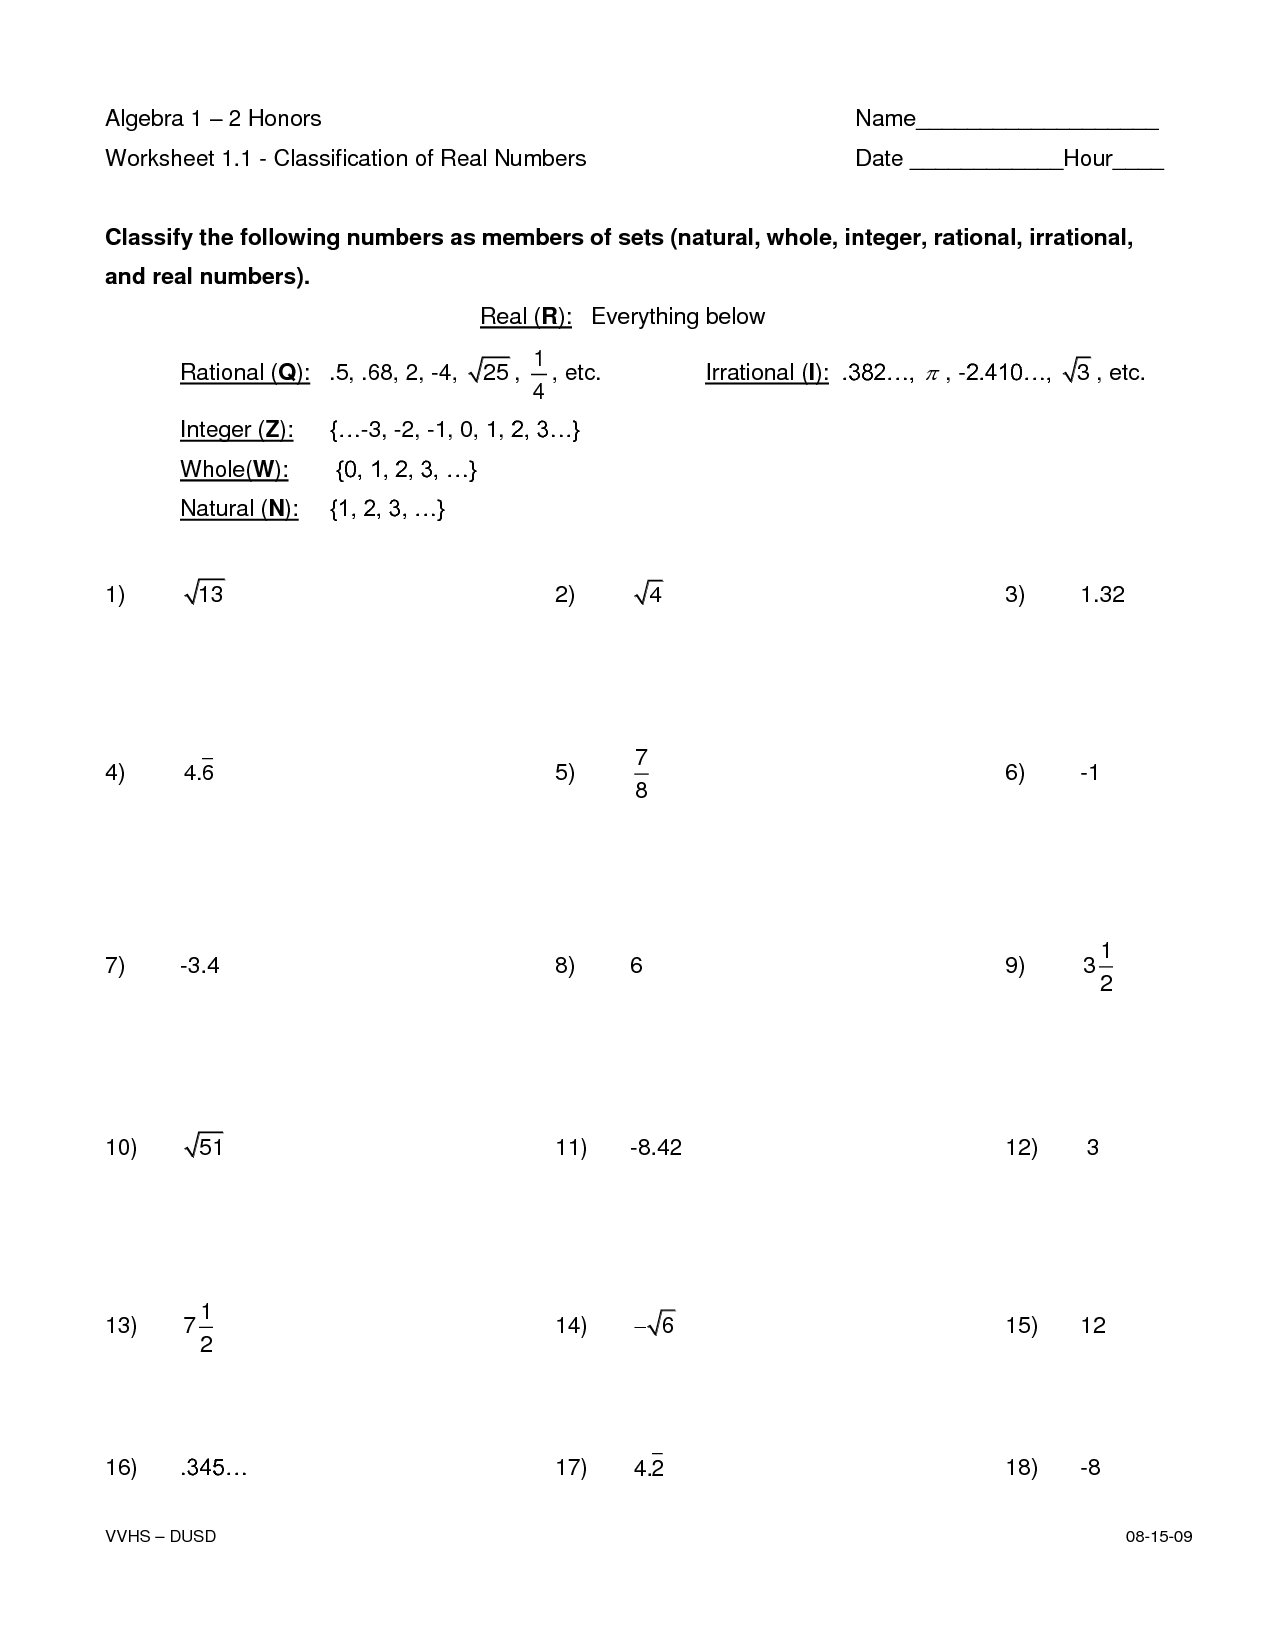 comparing-and-ordering-rational-numbers-worksheet-answer-key-pdf-fill